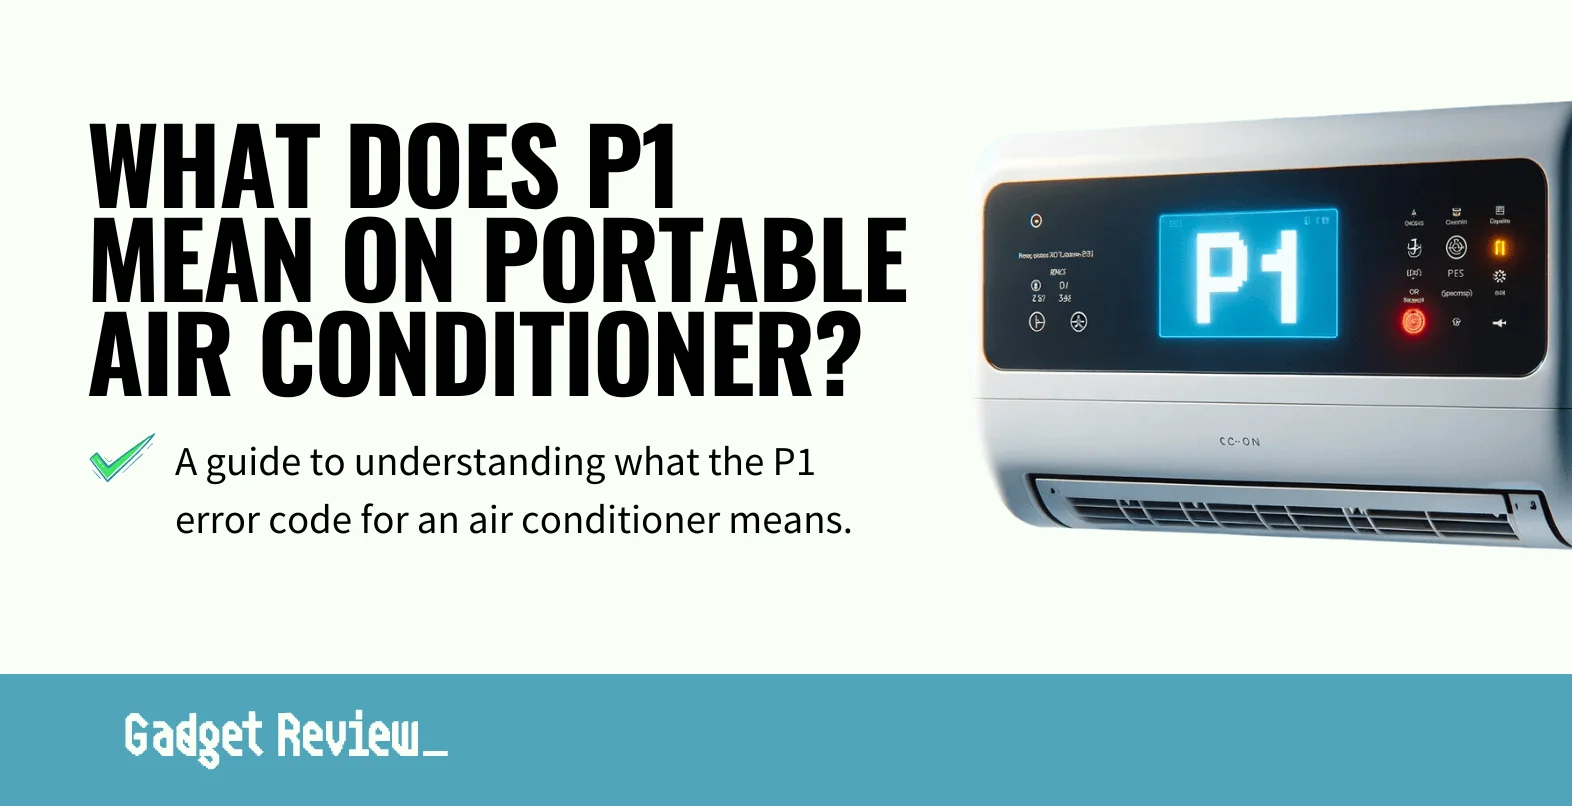 What Does P1 Mean on AC?